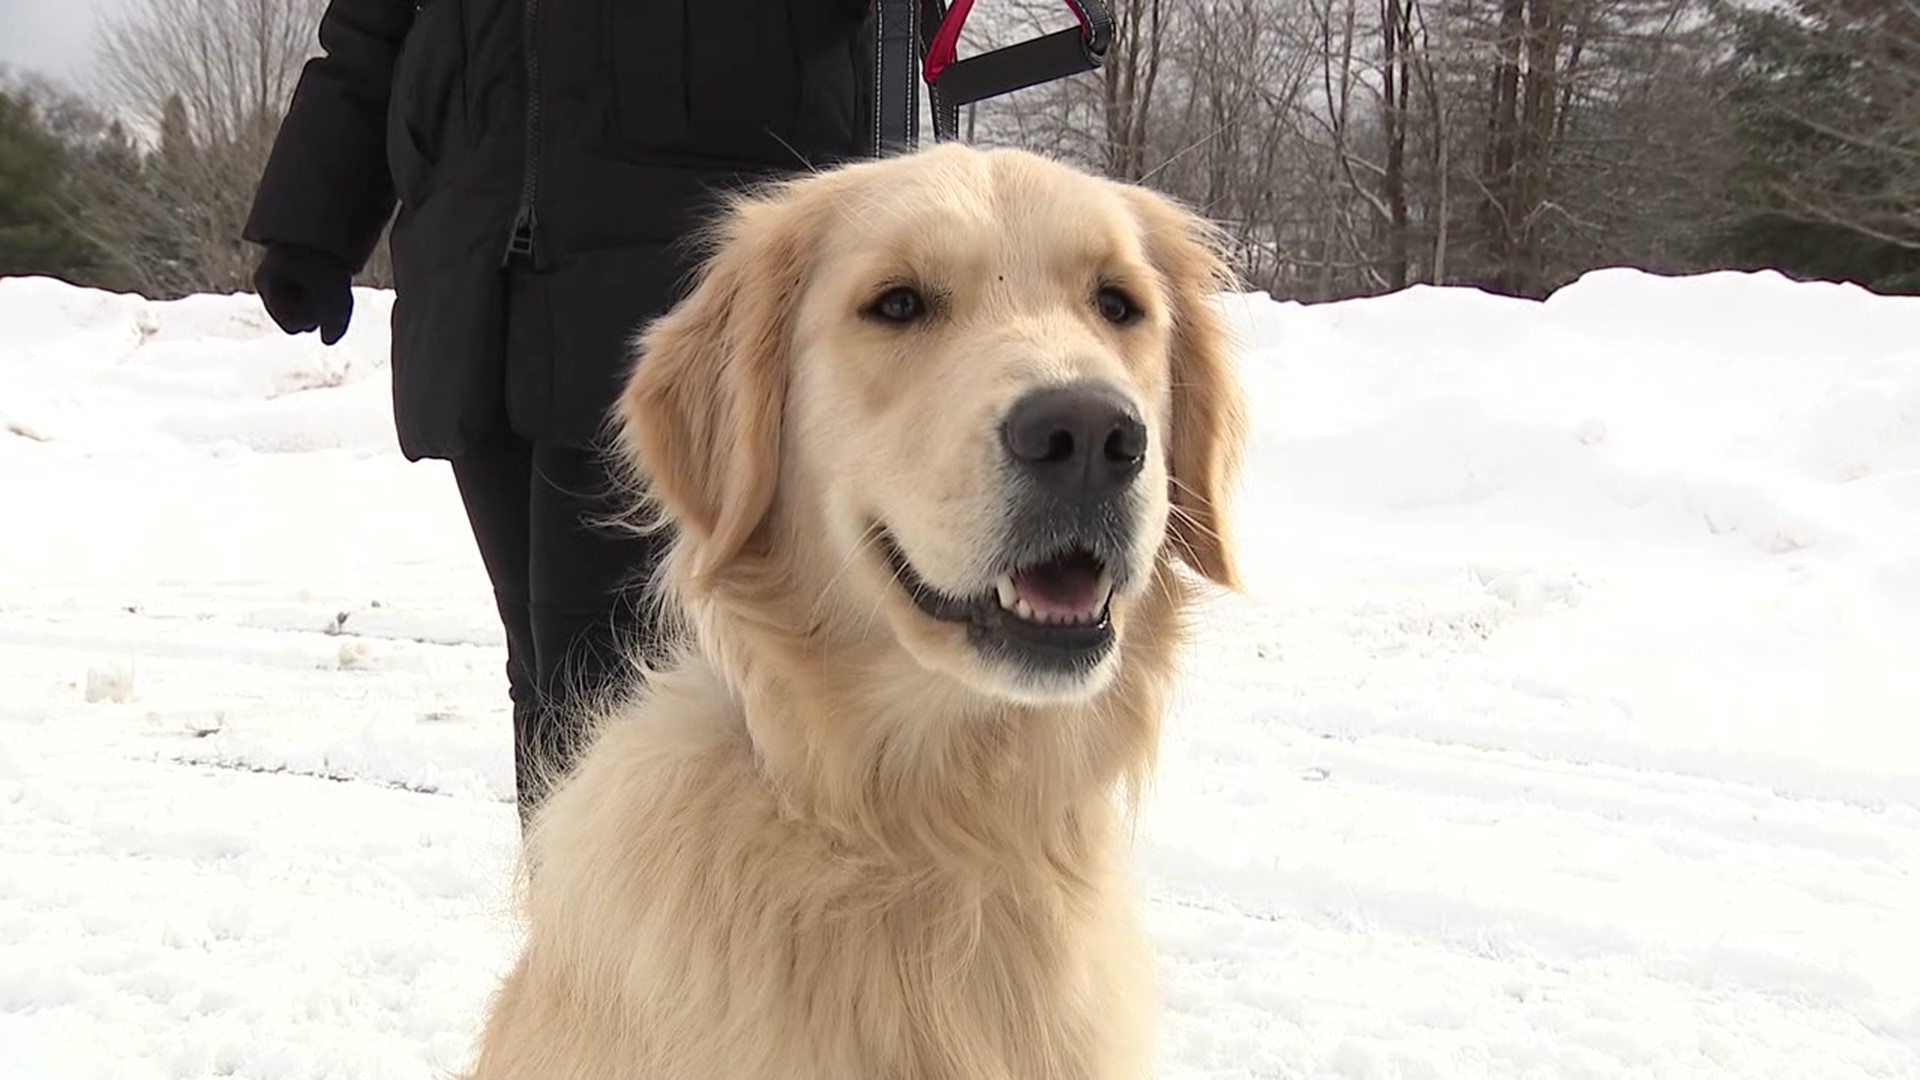 A golden retriever that went missing around Thanksgiving, is finally back home with her family.